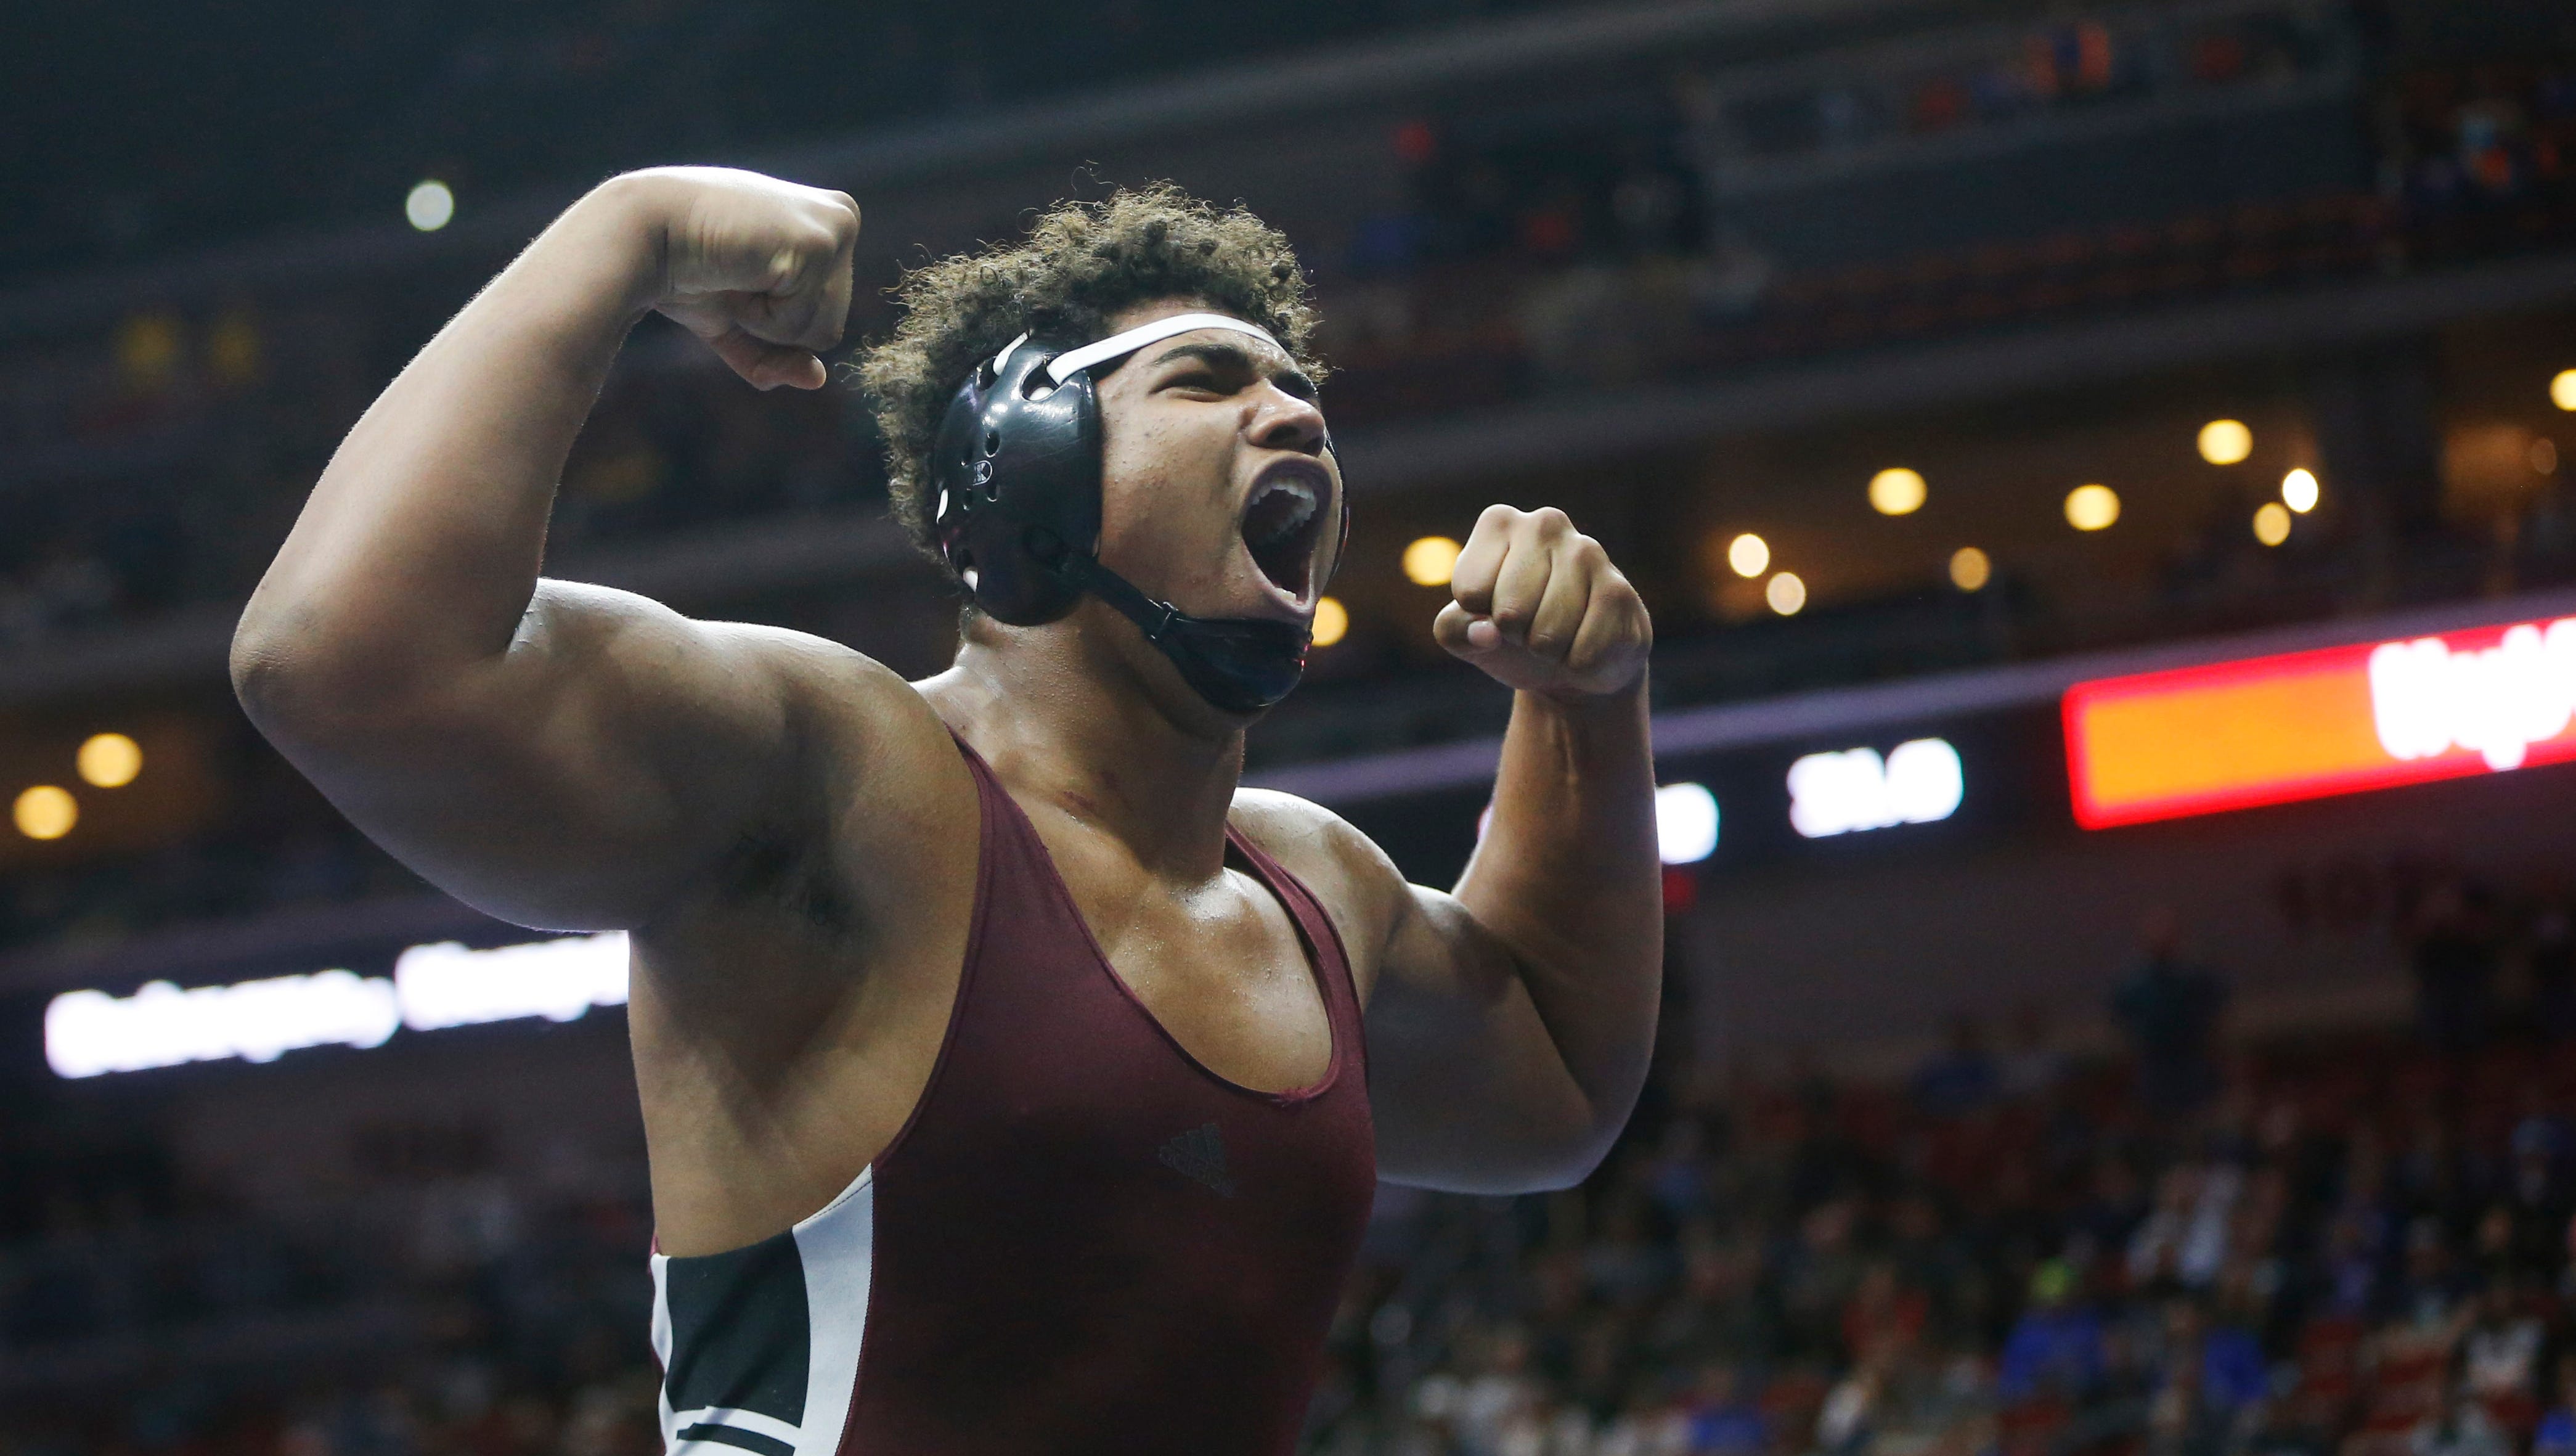 Mount Vernon's Tristan Wirfs celebrates his win in the class 2A, 220-pound title match Saturday, Feb. 18, 2017, in the state wrestling finals at Wells Fargo Arena in Des Moines.